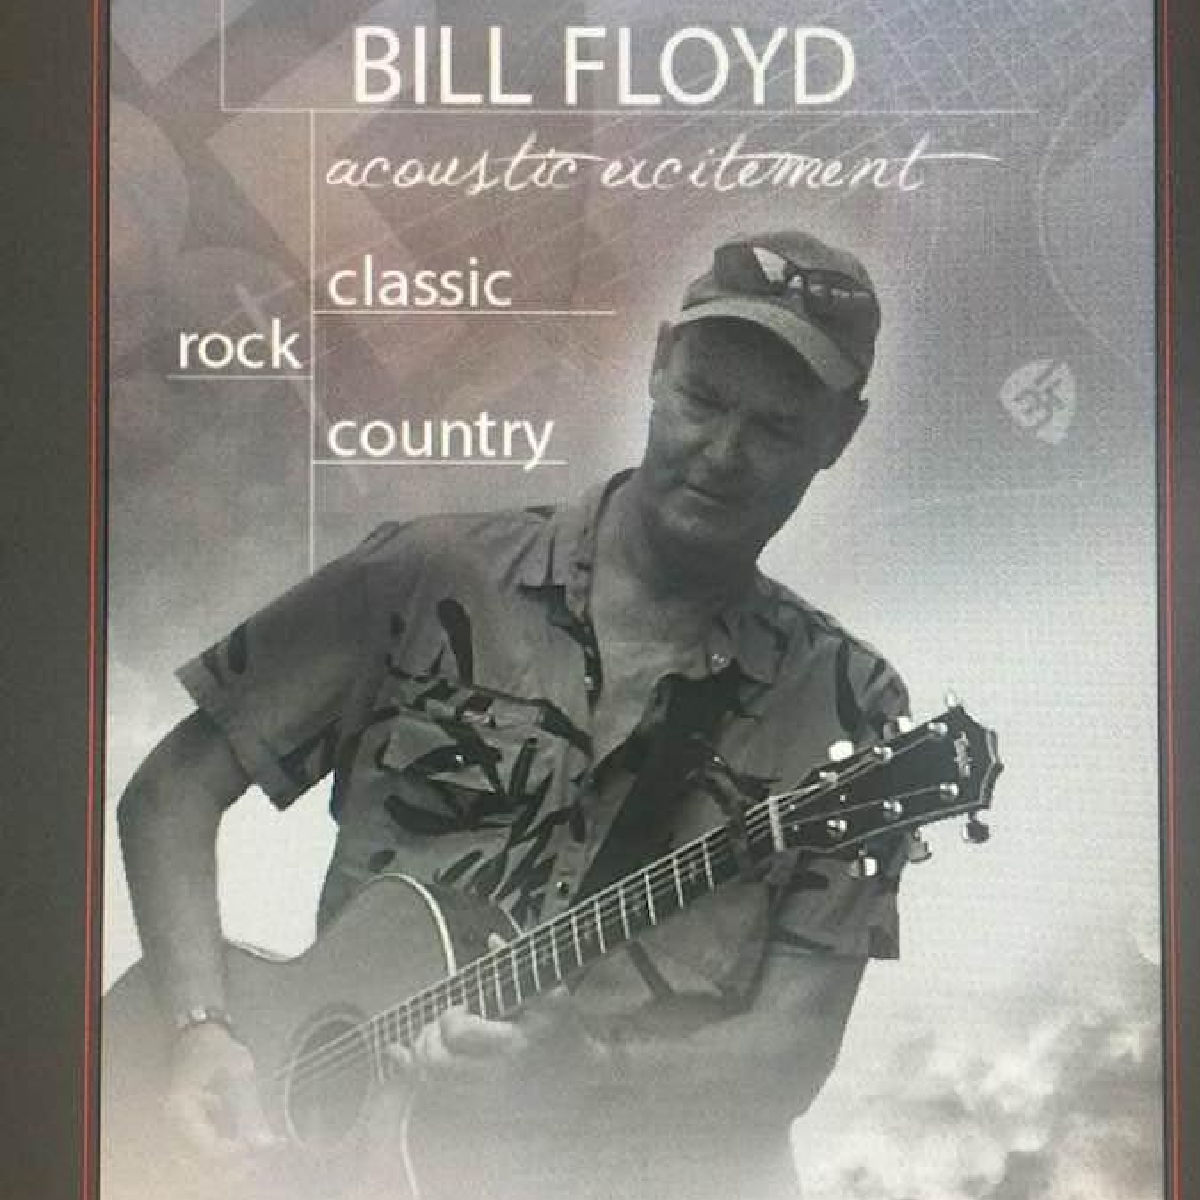 Live Music with Bill Floyd